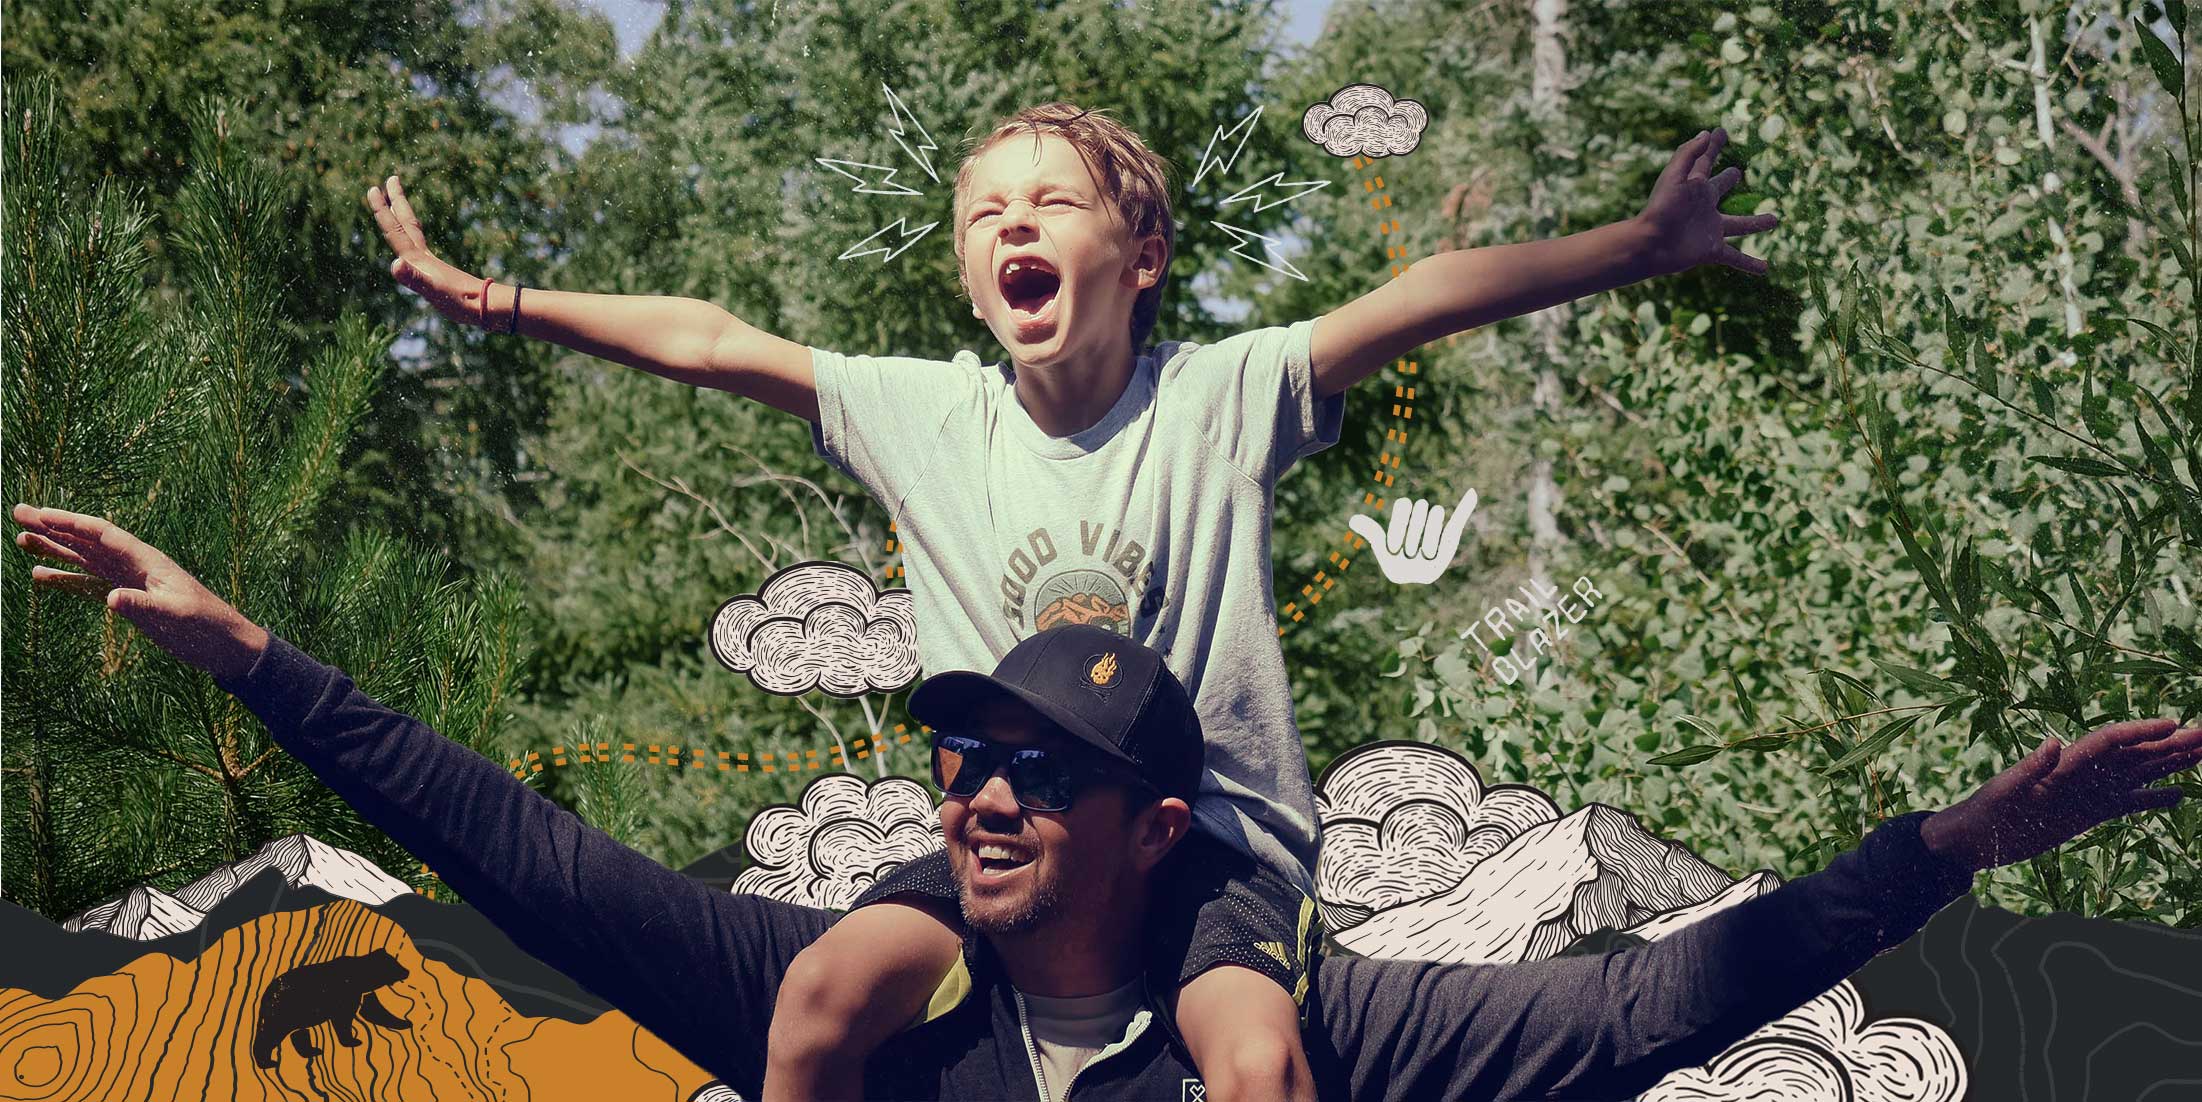 Milk x Whiskey - Awesome Styles. A Father and son hiking in the outdoors. The son is on his fathers shoulders pretending to fly with a ton of excitement for the outdoors.